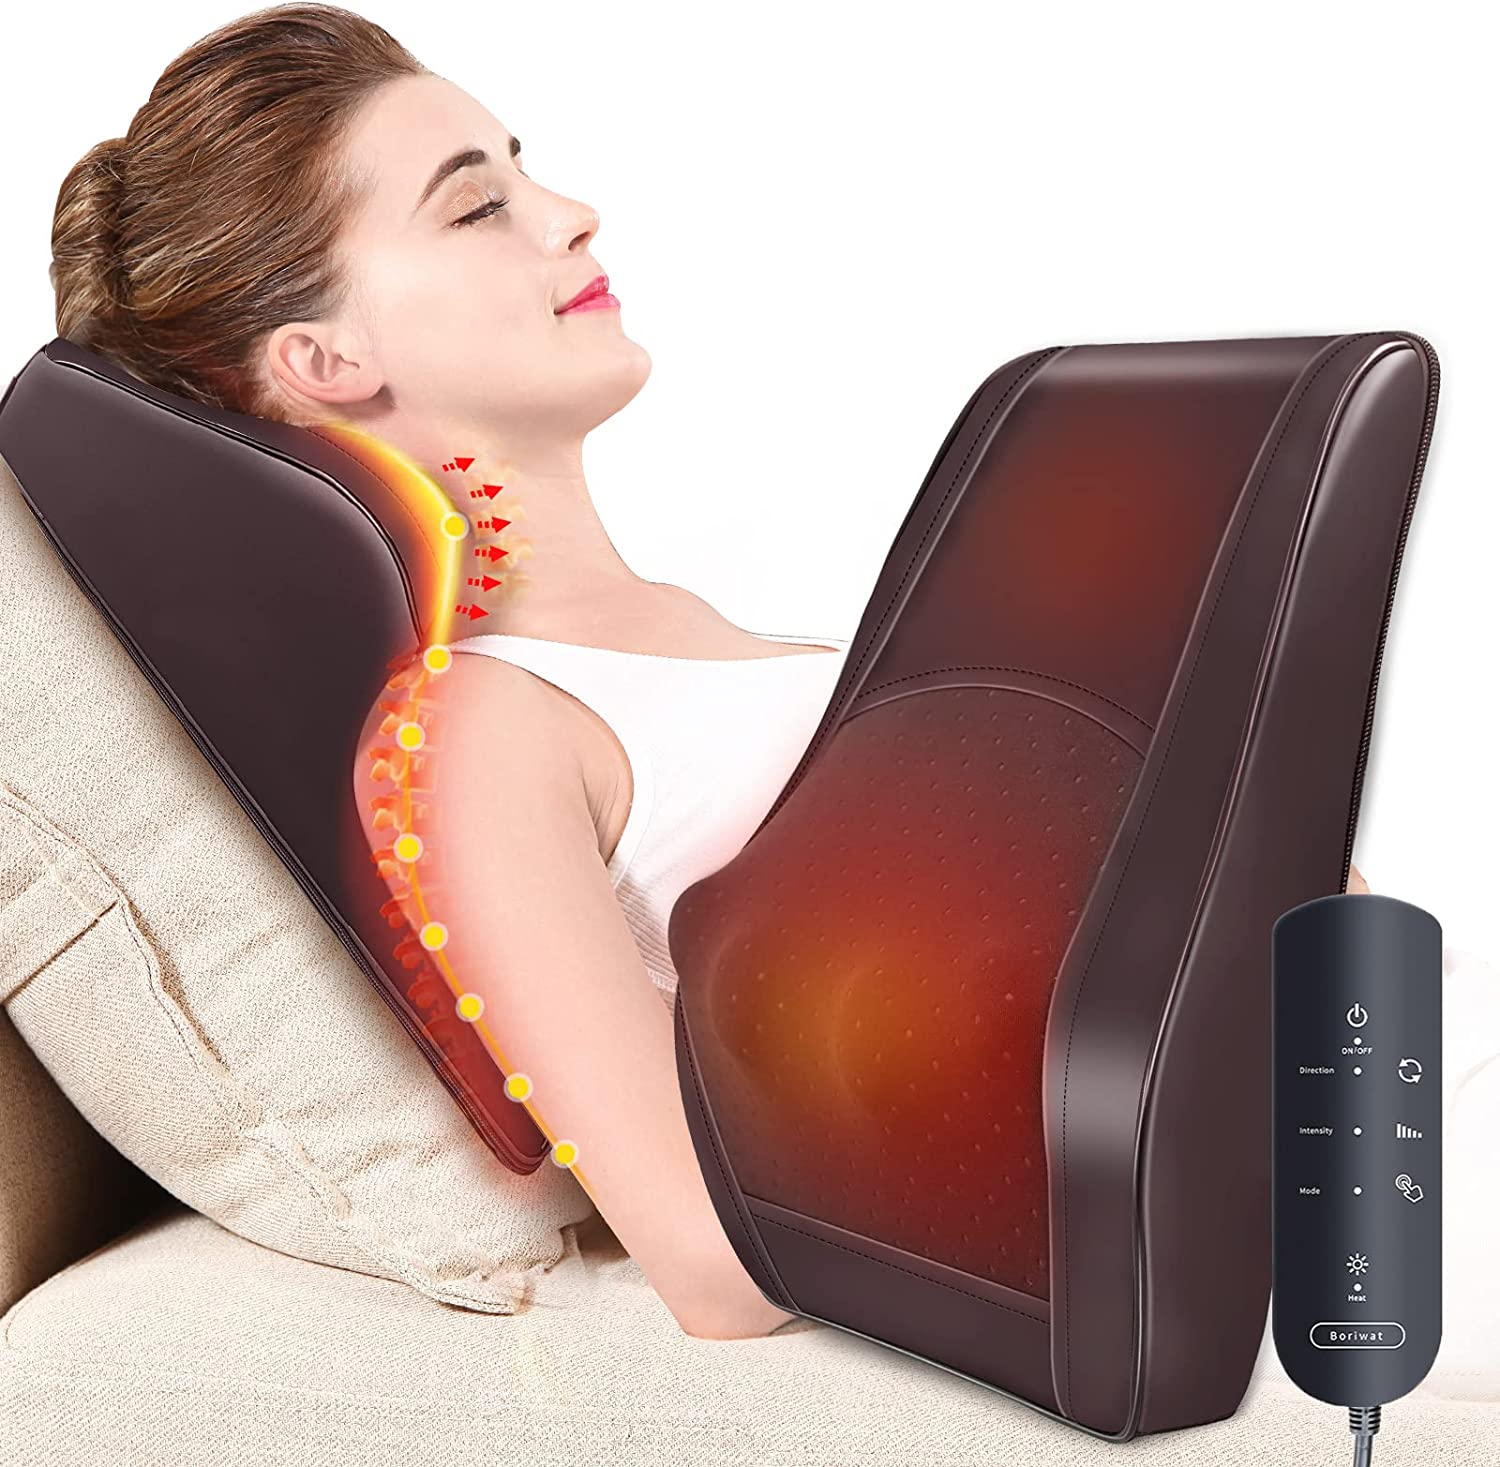  Shiatsu Back Neck and Shoulder Massager with Adjustable Heat  and Speed, 8 Nodes Electric Deep Tissue Kneading Massage for Back Pain  Relief, Ideas Christmas Gifts for Women Men, Use at Home